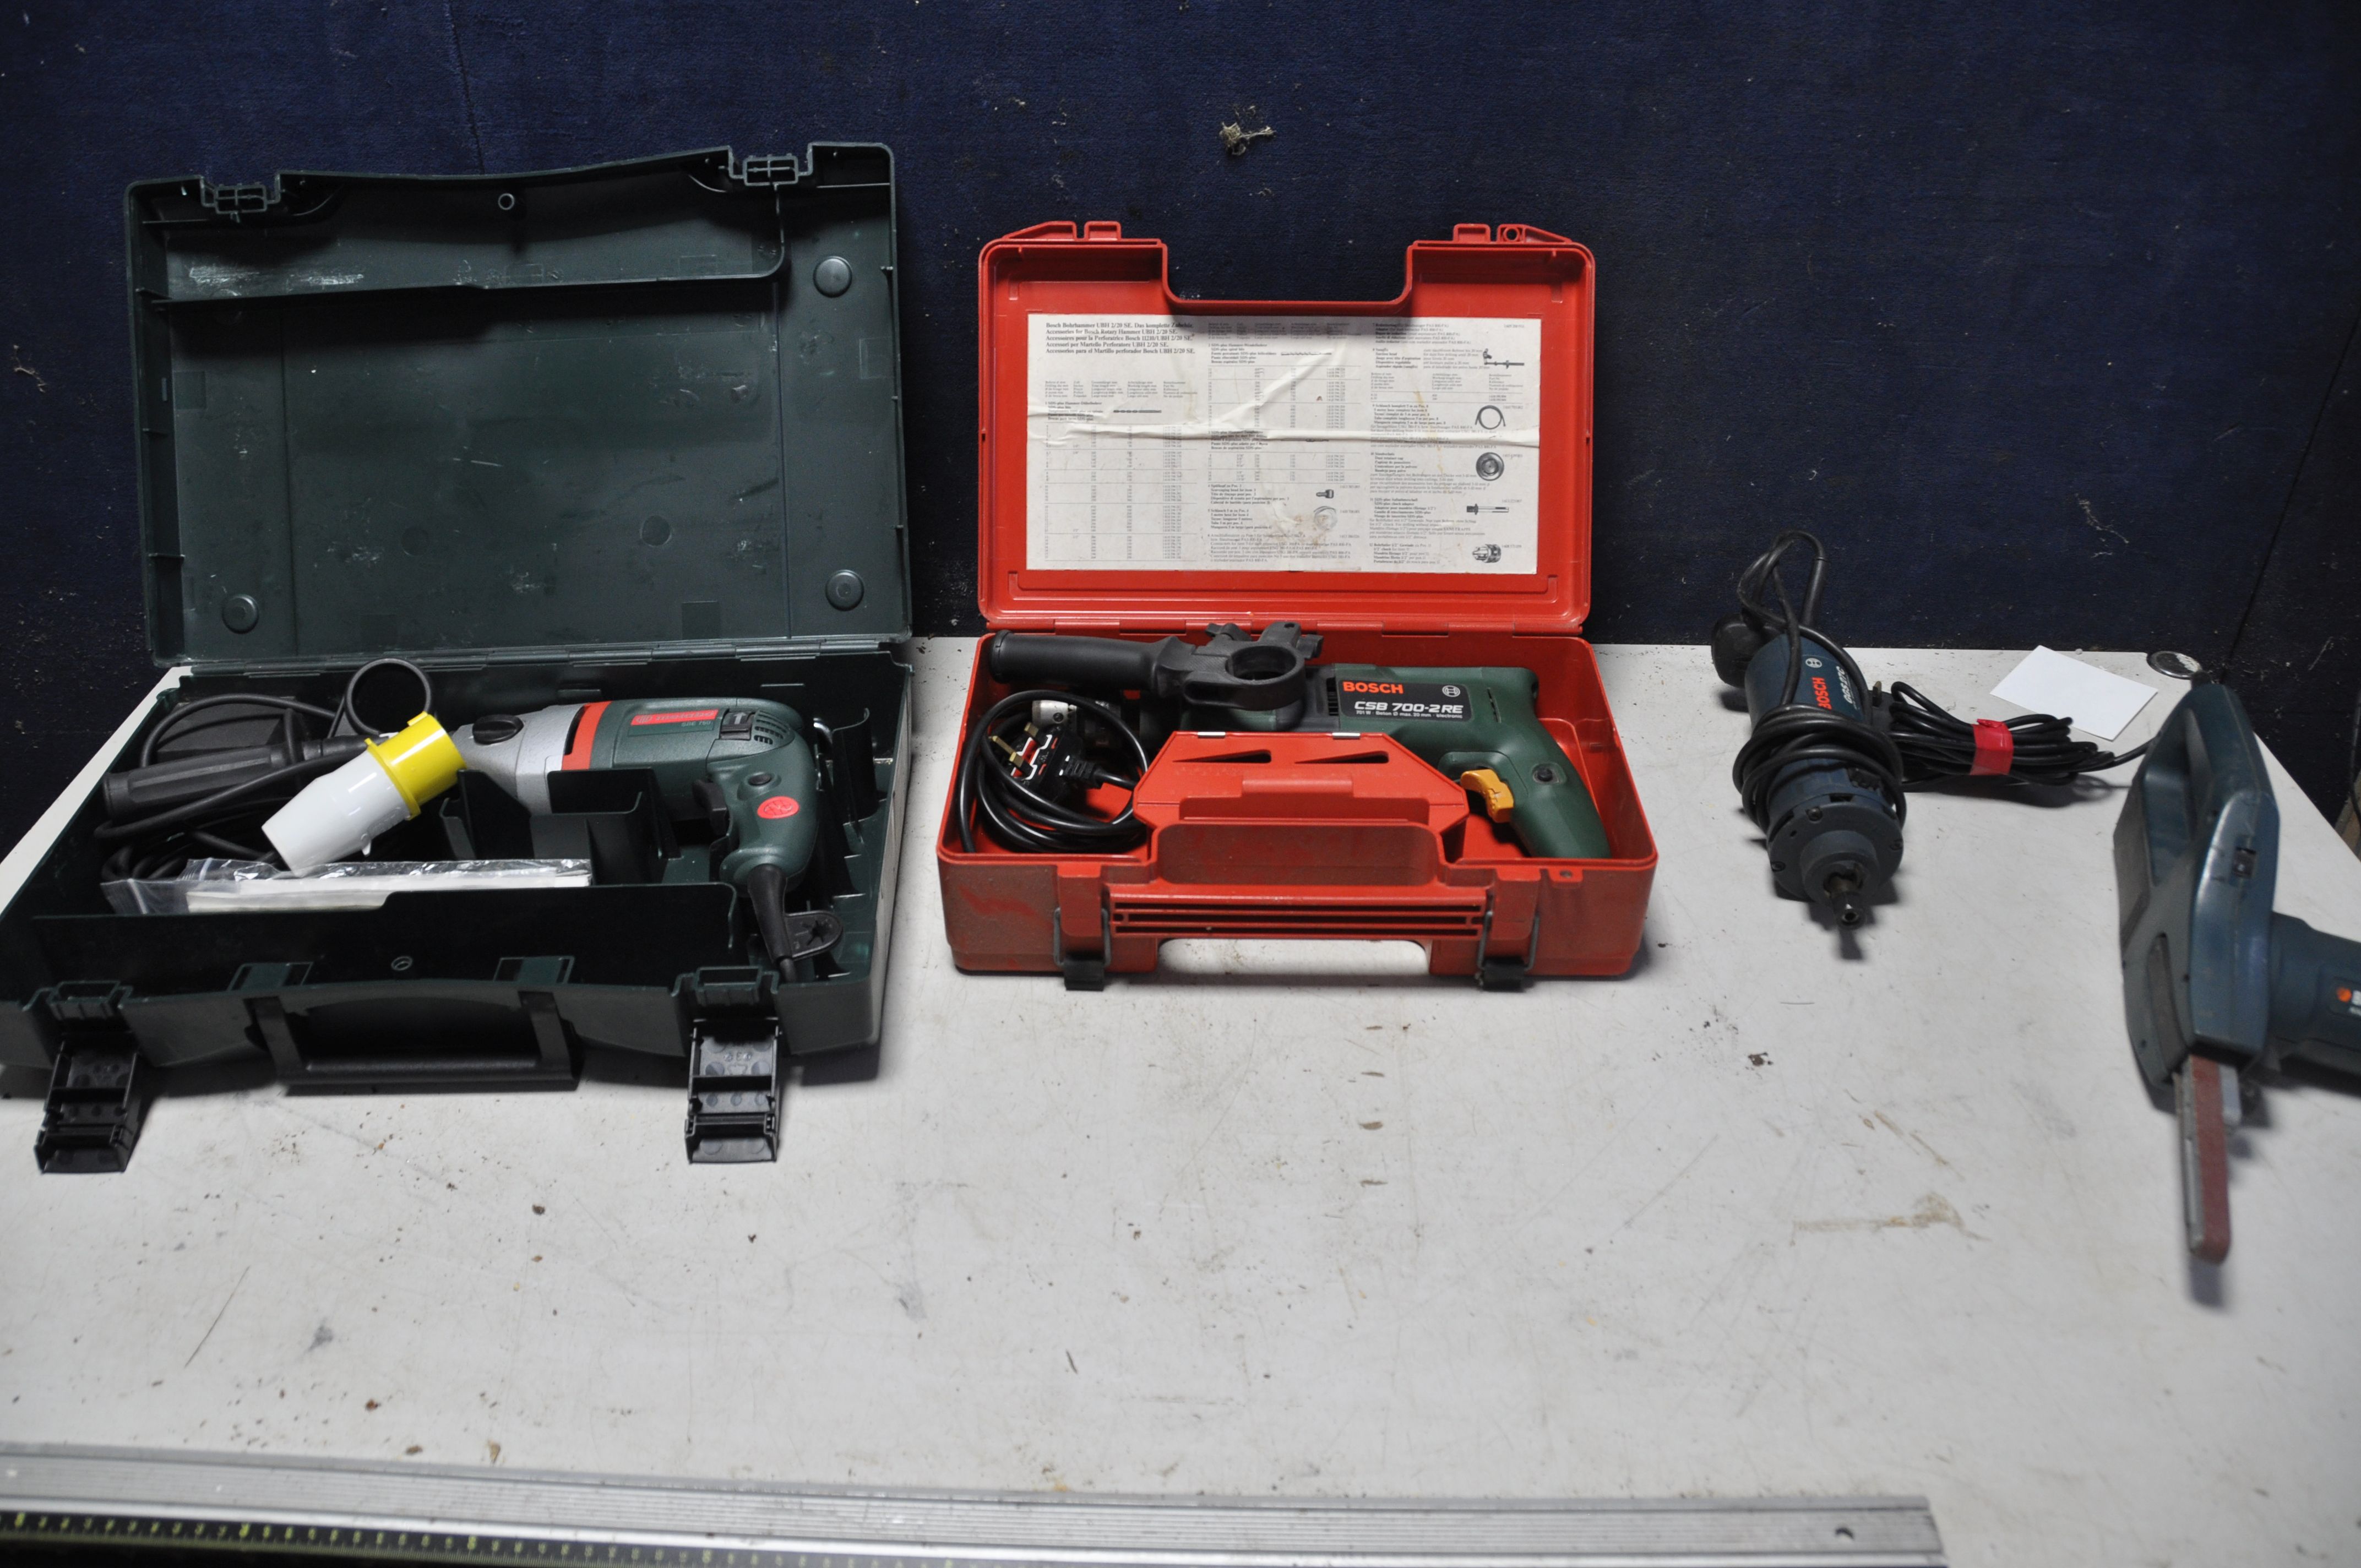 A METABO SBE750 DRILL in original case with 110v plug along with a Bosch CSB 700-2RE drill in